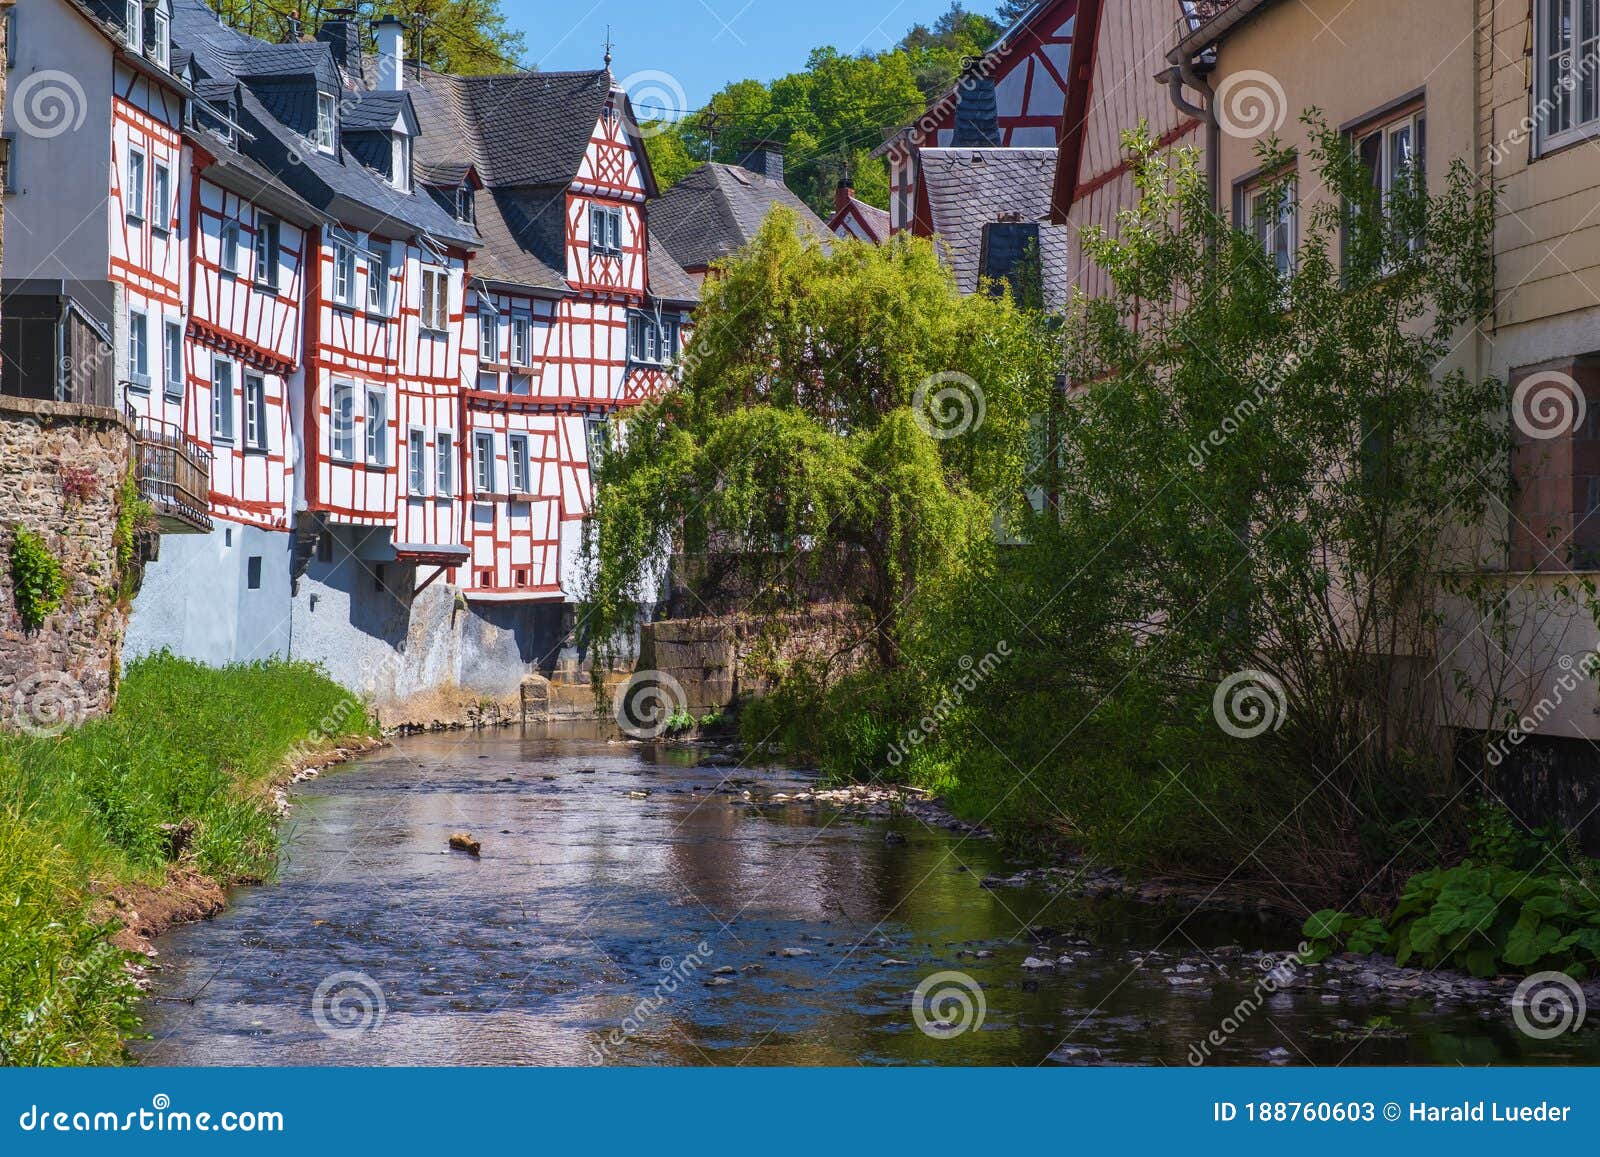 the river elzbach and half-timbered houses